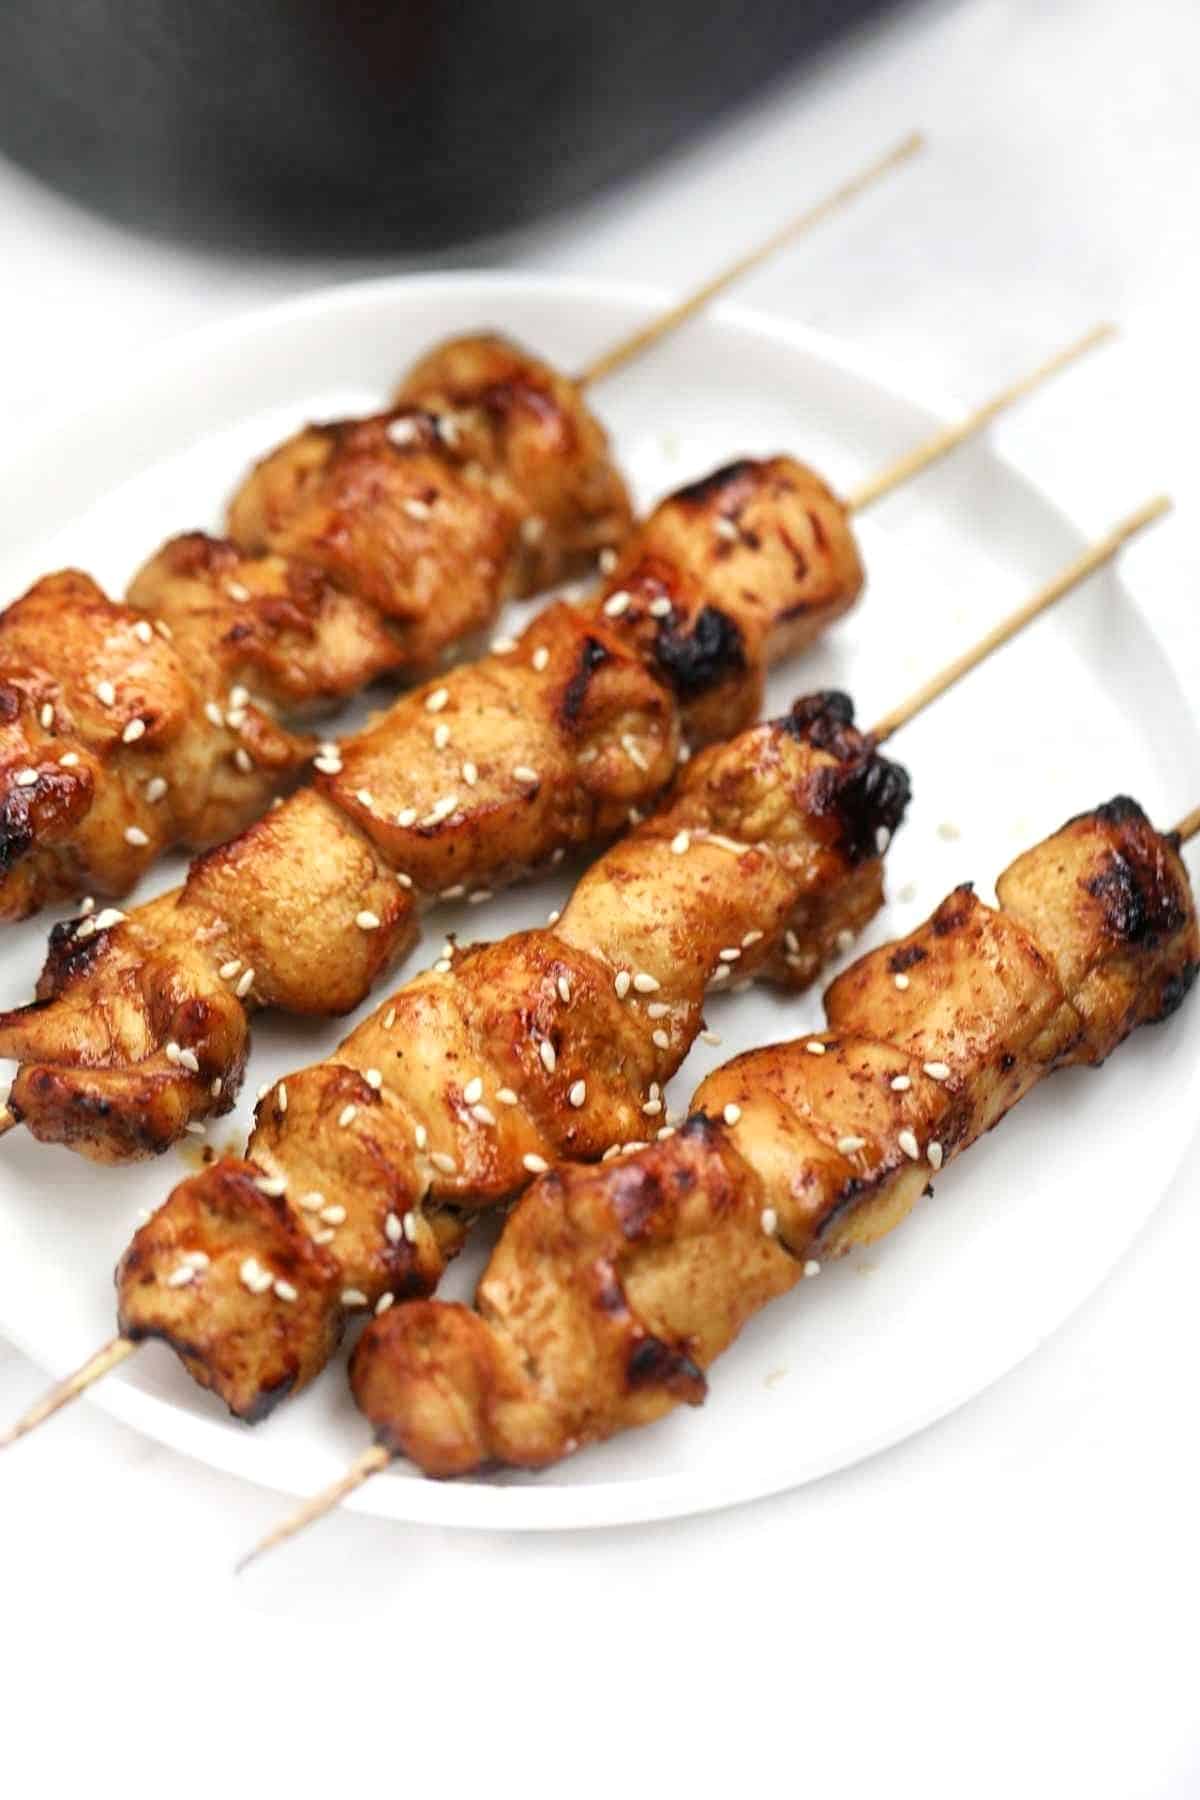 Chinese chicken on a stick served and garnished with sesame seeds.